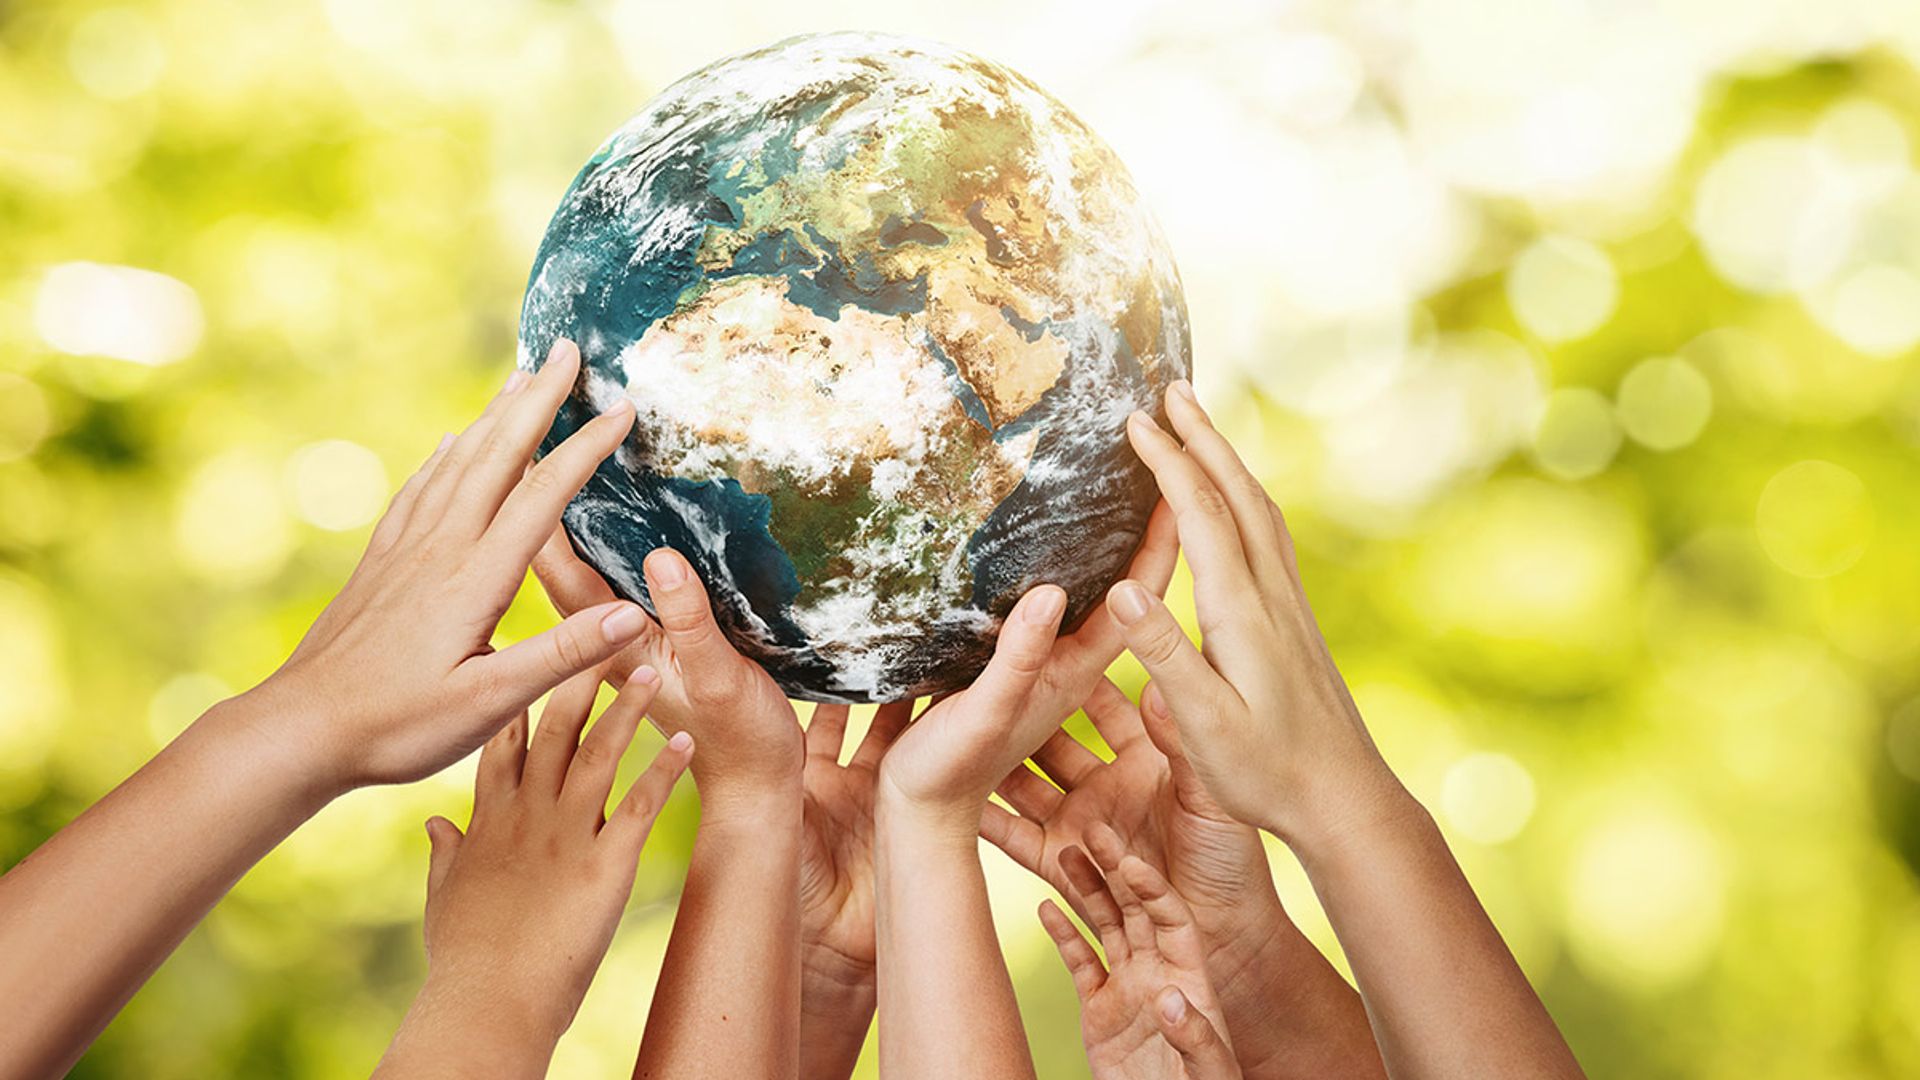 5 easy ways to be kinder to the planet